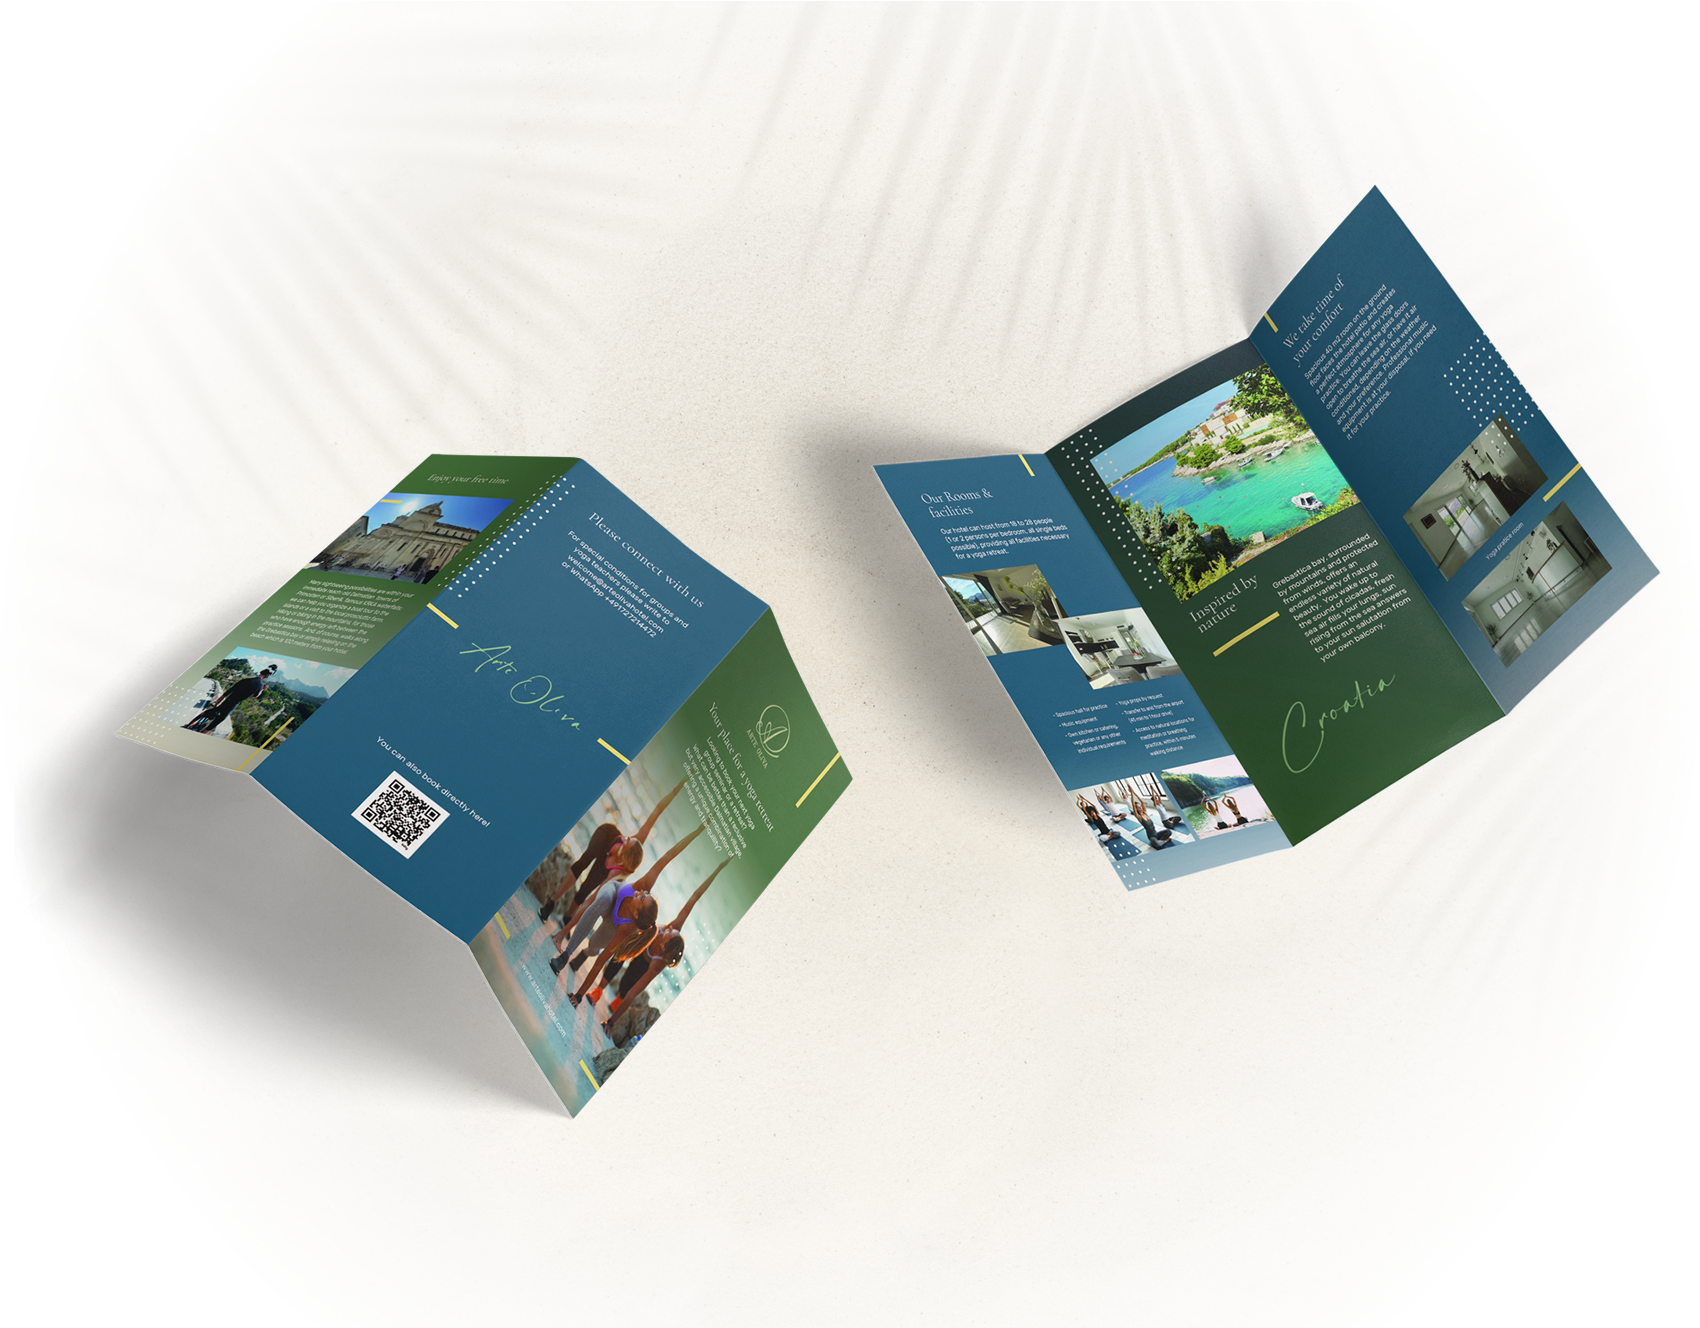 Arte Oliva Hotel and intoappsnwebs | working on brochures